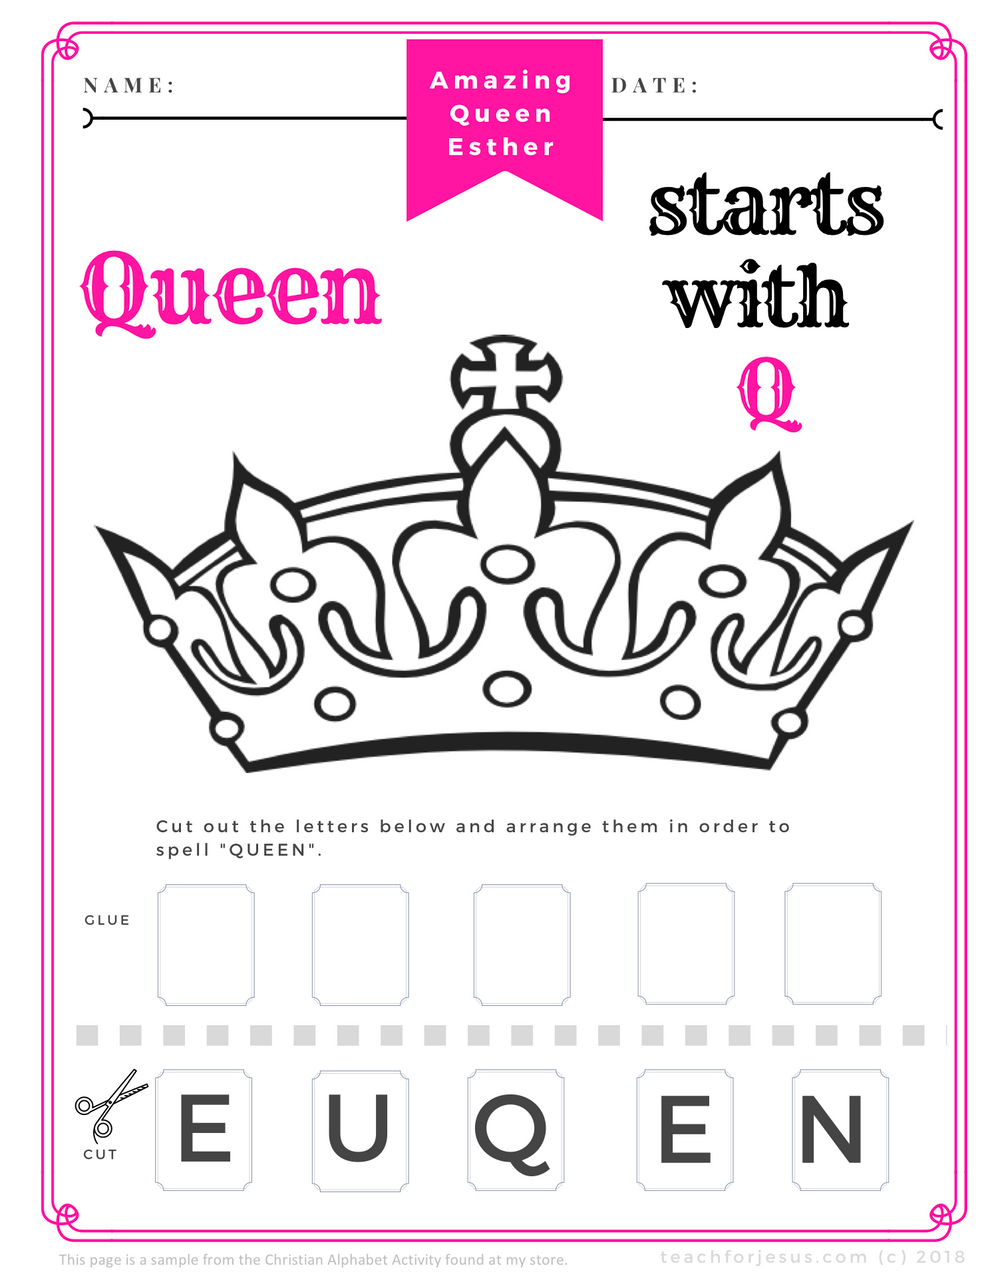 queen-esther-printables-printable-world-holiday